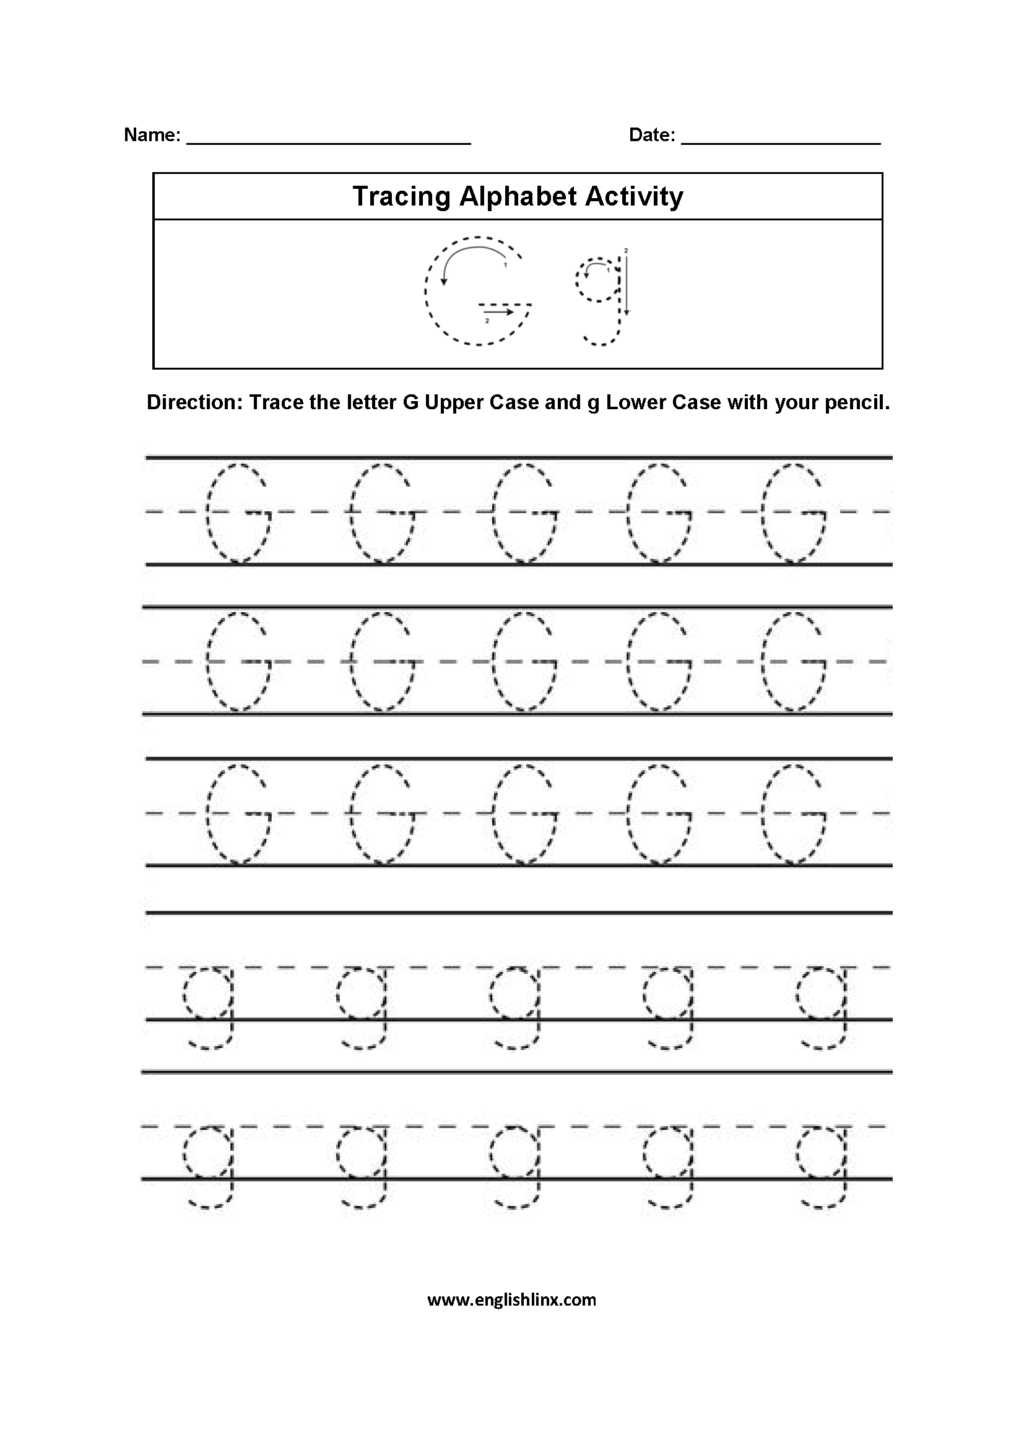 Worksheet ~ Alphabet Worksheets Tracing Awesome Sheet within G Letter Tracing